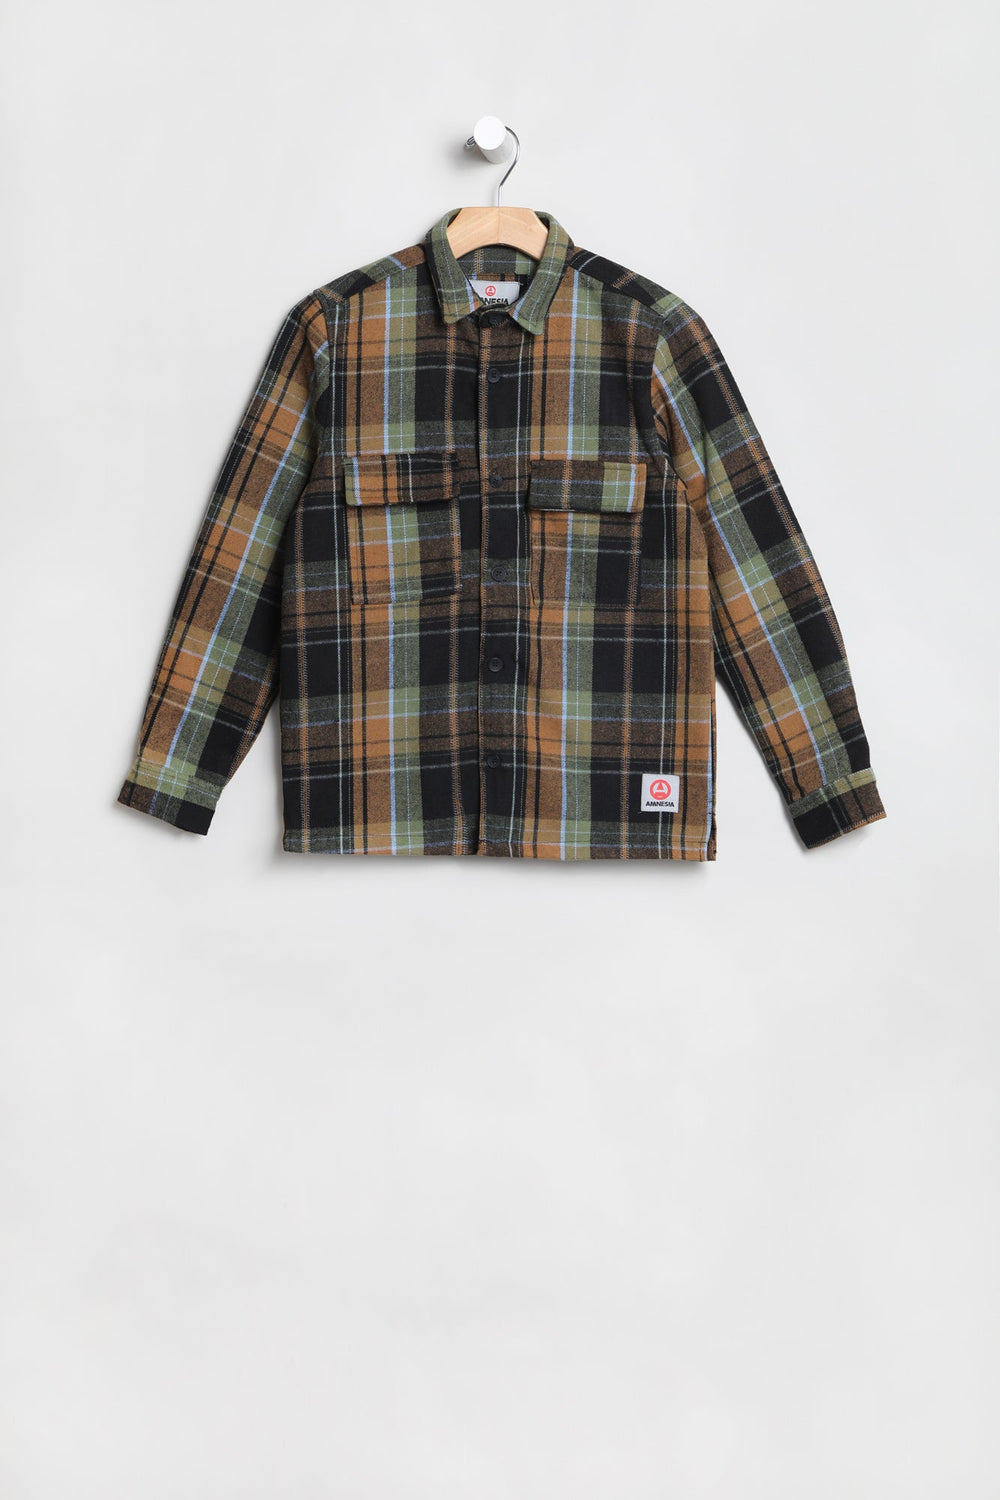 Amnesia Youth Plaid Button-Up Green